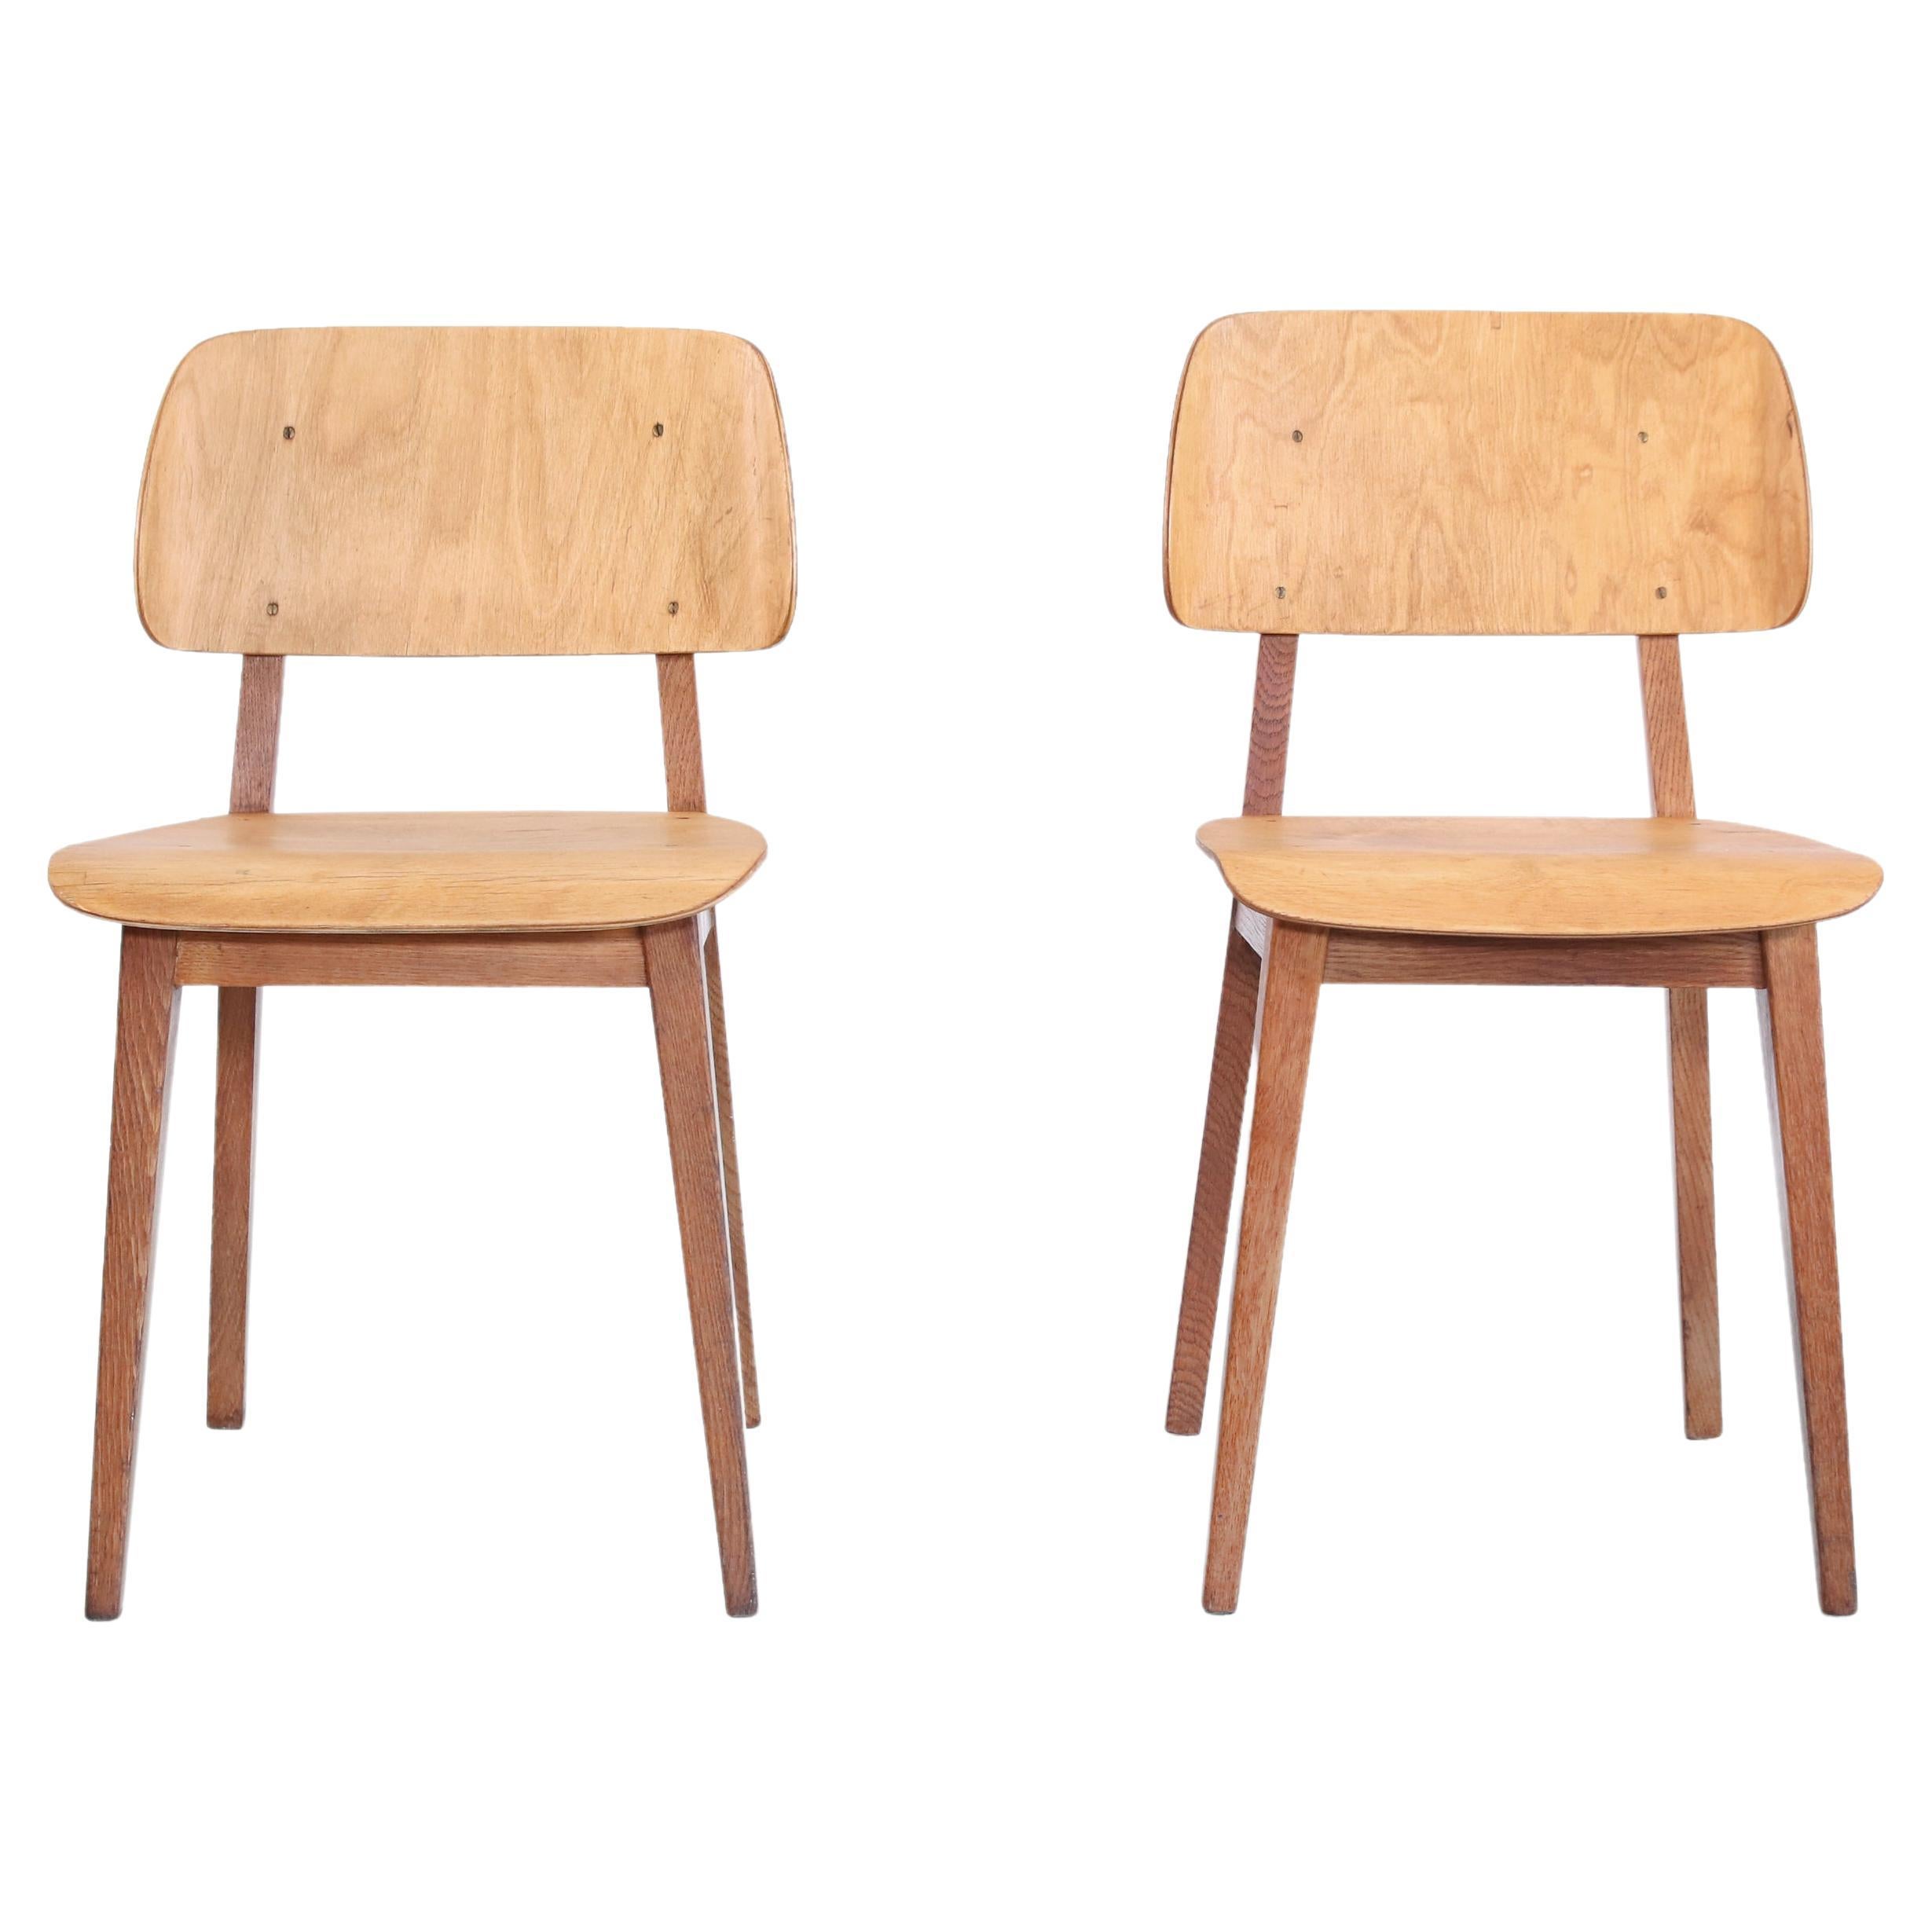 Set of Two Pastoe Irene Chairs by Dirk Braakman, 1940's For Sale